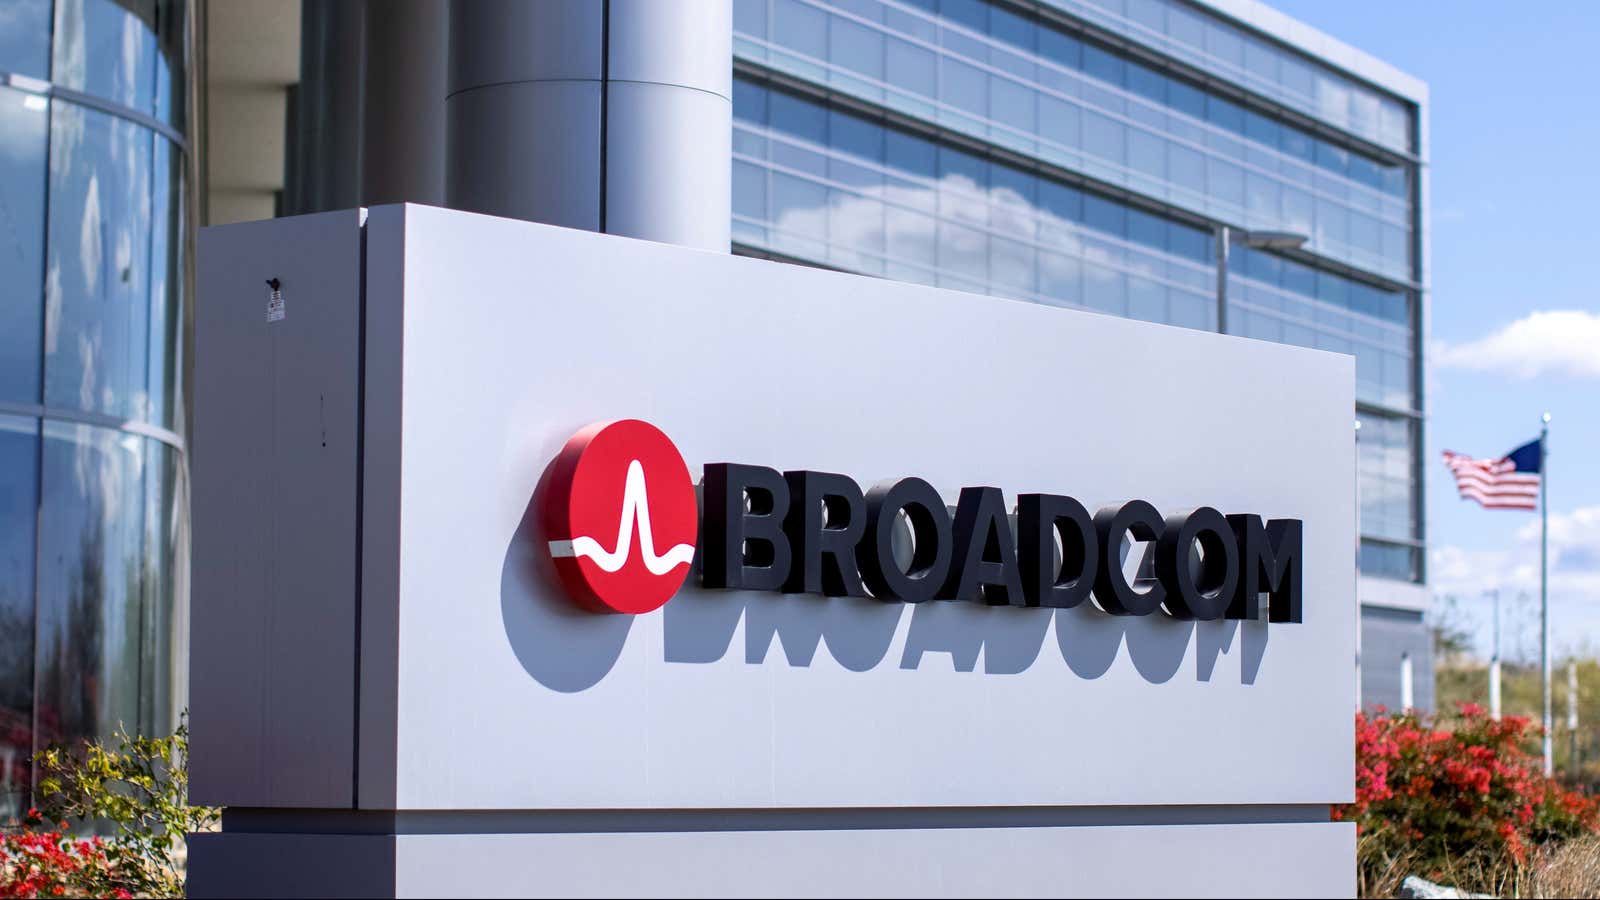 The Broadcom company logo is shown outside one of their office complexes in Irvine, California.